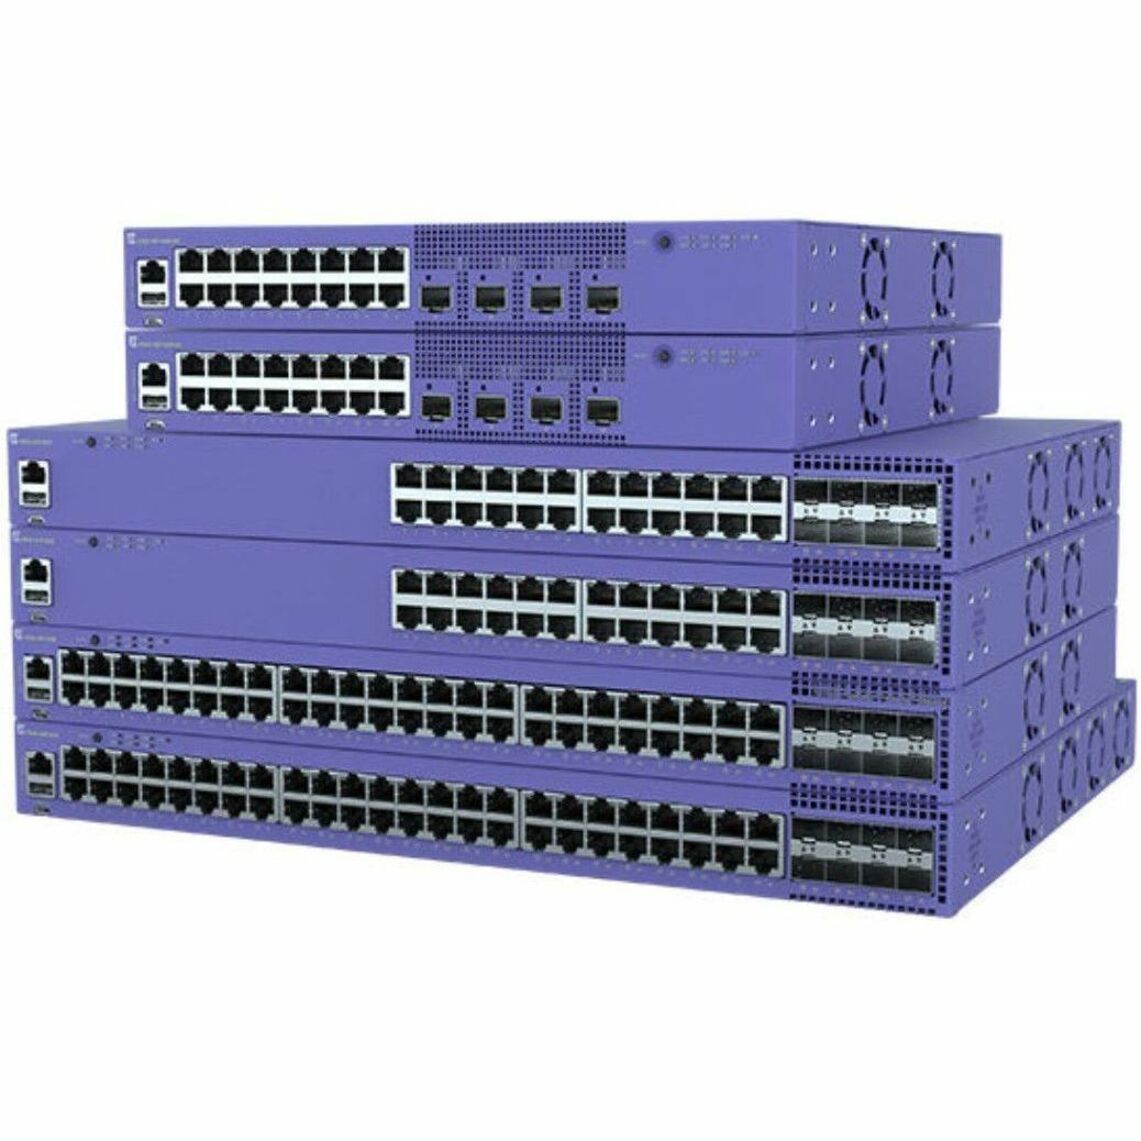 Extreme Networks 5320-24T-8XE ExtremeSwitching Ethernet Switch 24 Port Gigabit Ethernet 8 Port 10 Gigabit Ethernet